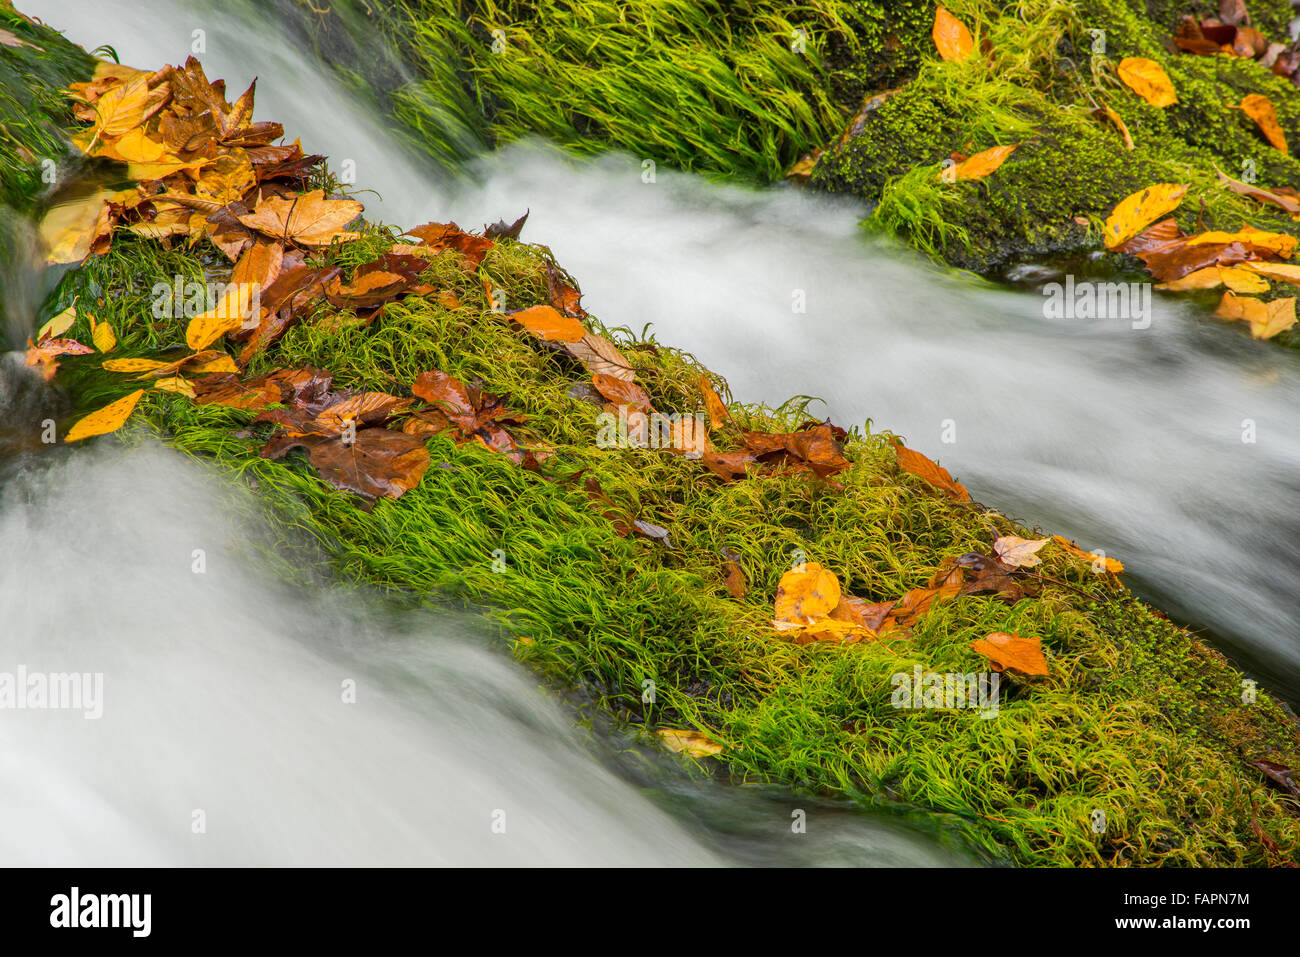 Autumn leaves and moss, Laurel Creek Falls River, Great Smoky Mountains NP, Tennessee USA Stock Photo